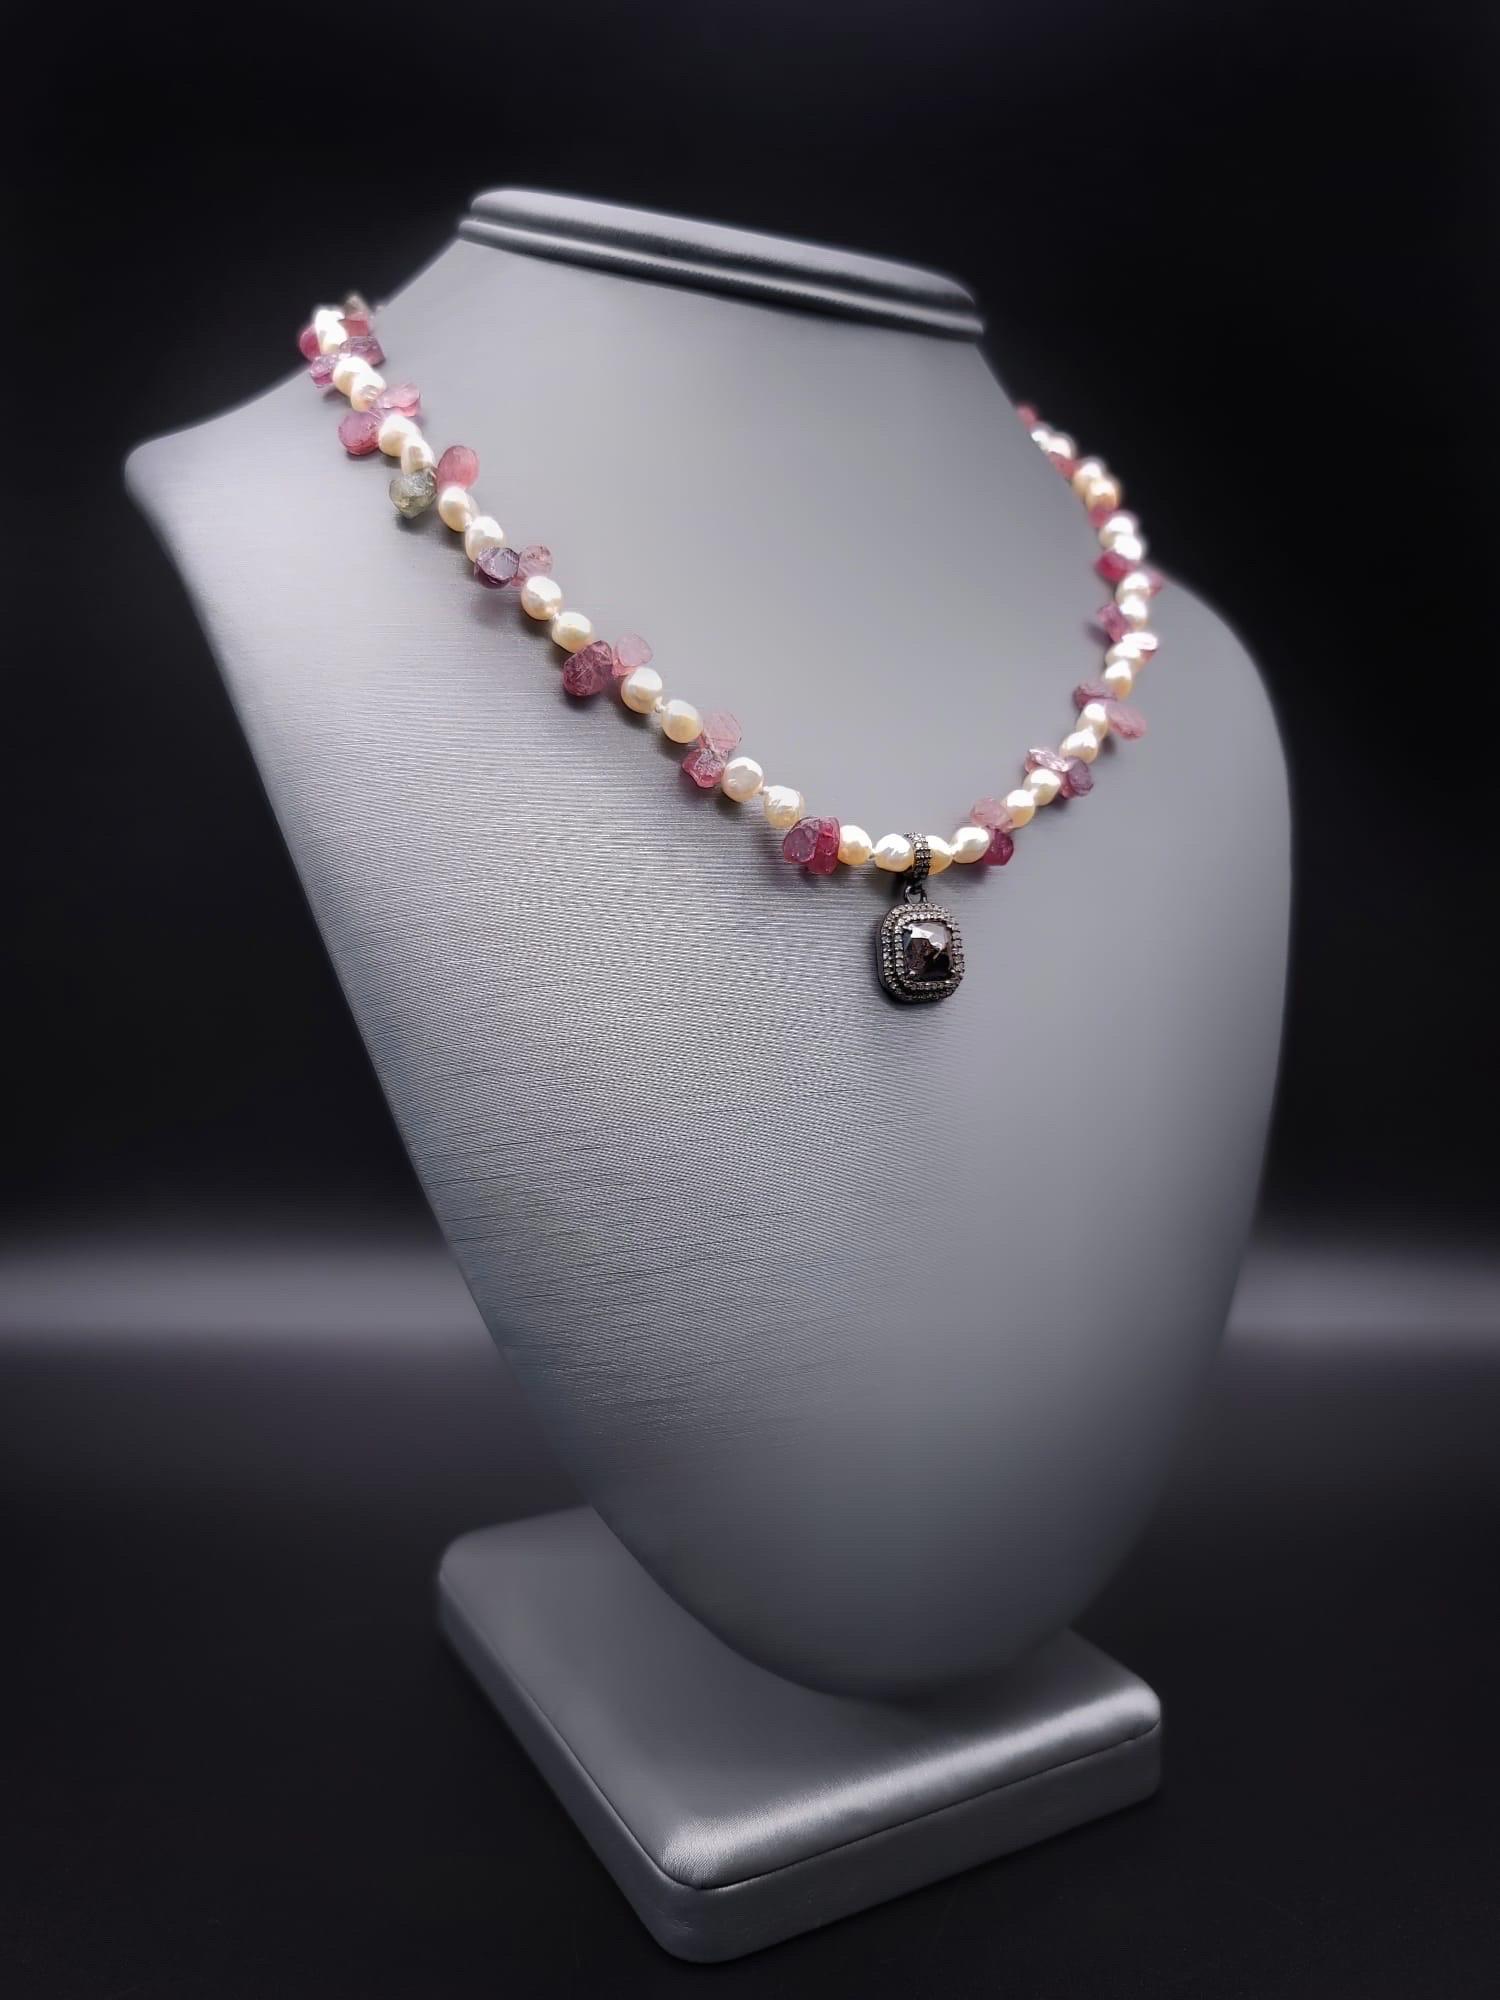 One-of-a-Kind

An elegantly romantic single-strand necklace 4m.m Pearls  
Interspersed between twin Pink Sapphire teardrops surrounding a delicate pendant of two rows of diamonds surrounding a square faceted ruby. The clasp is a sterling silver box